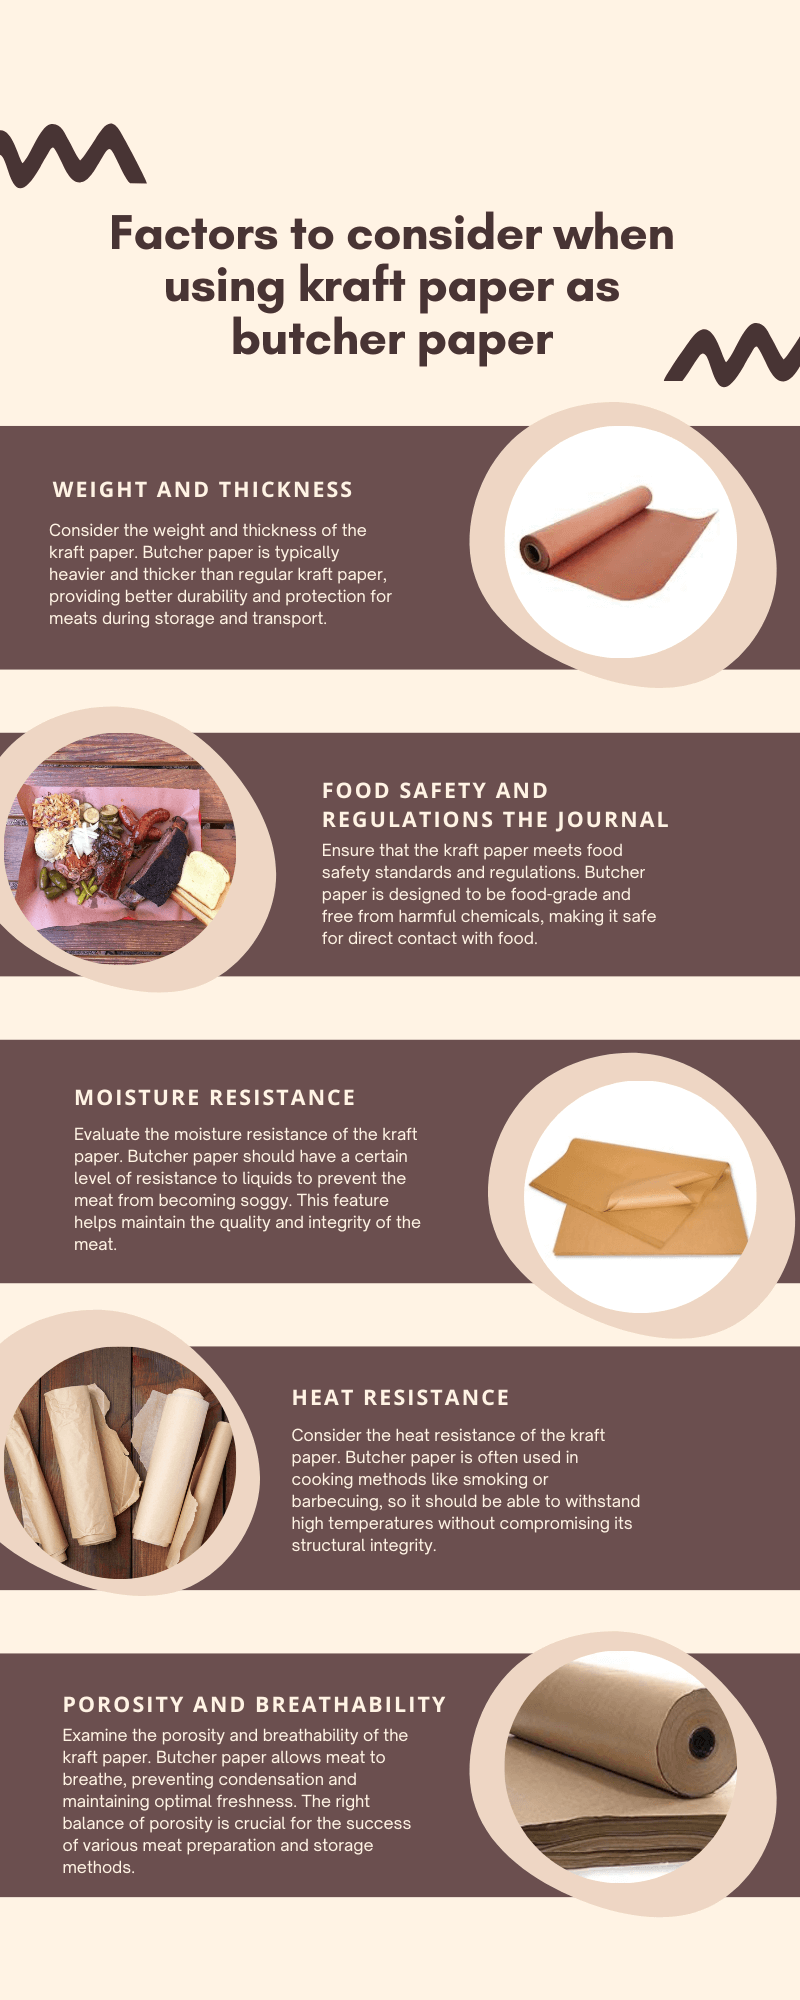 Factors to consider when using kraft paper as butcher paper